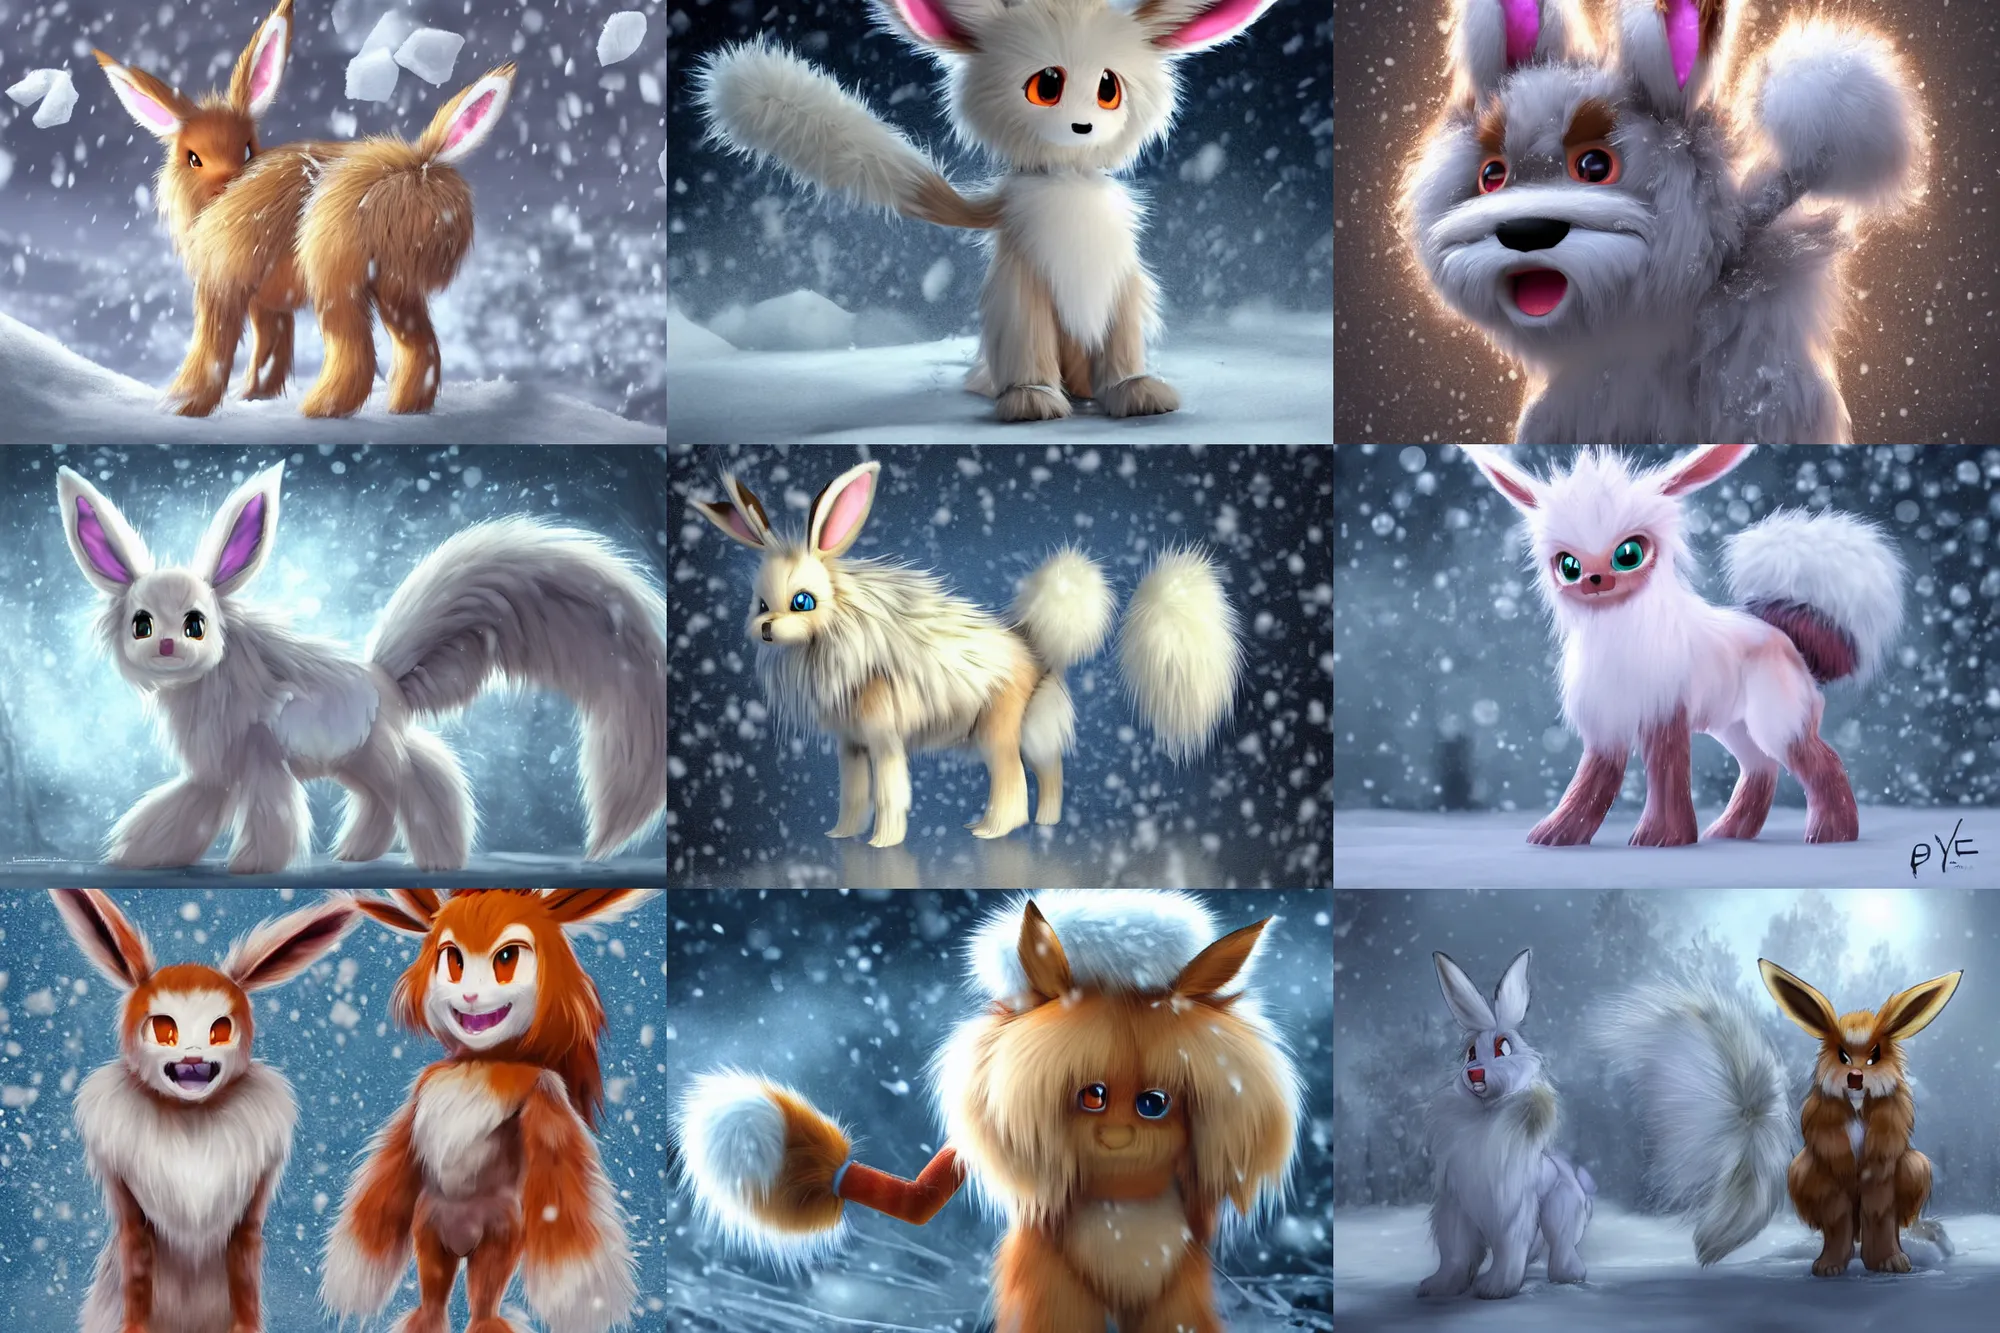 Prompt: fan art rendering of a bipedal frosty anthro fuzzy eevee evil comb sitting in snow eevee high resolution anthro eevee humanoid, CGsociety UHD 4K highly detailed, intricate heterochromatic sad, watery eyes with clawed finger in nose eevee anthro standing up two legs and two arms poofy synthetic fur tail bloody wet fur frilled bow braided tail looking down bleeding eevee anthro tongue sticking out wearing glasses smiling in winter facing the moon zions national frozen high resolution maid dress humanoid braided furry long tail wearing davey crockett hat holding a whip